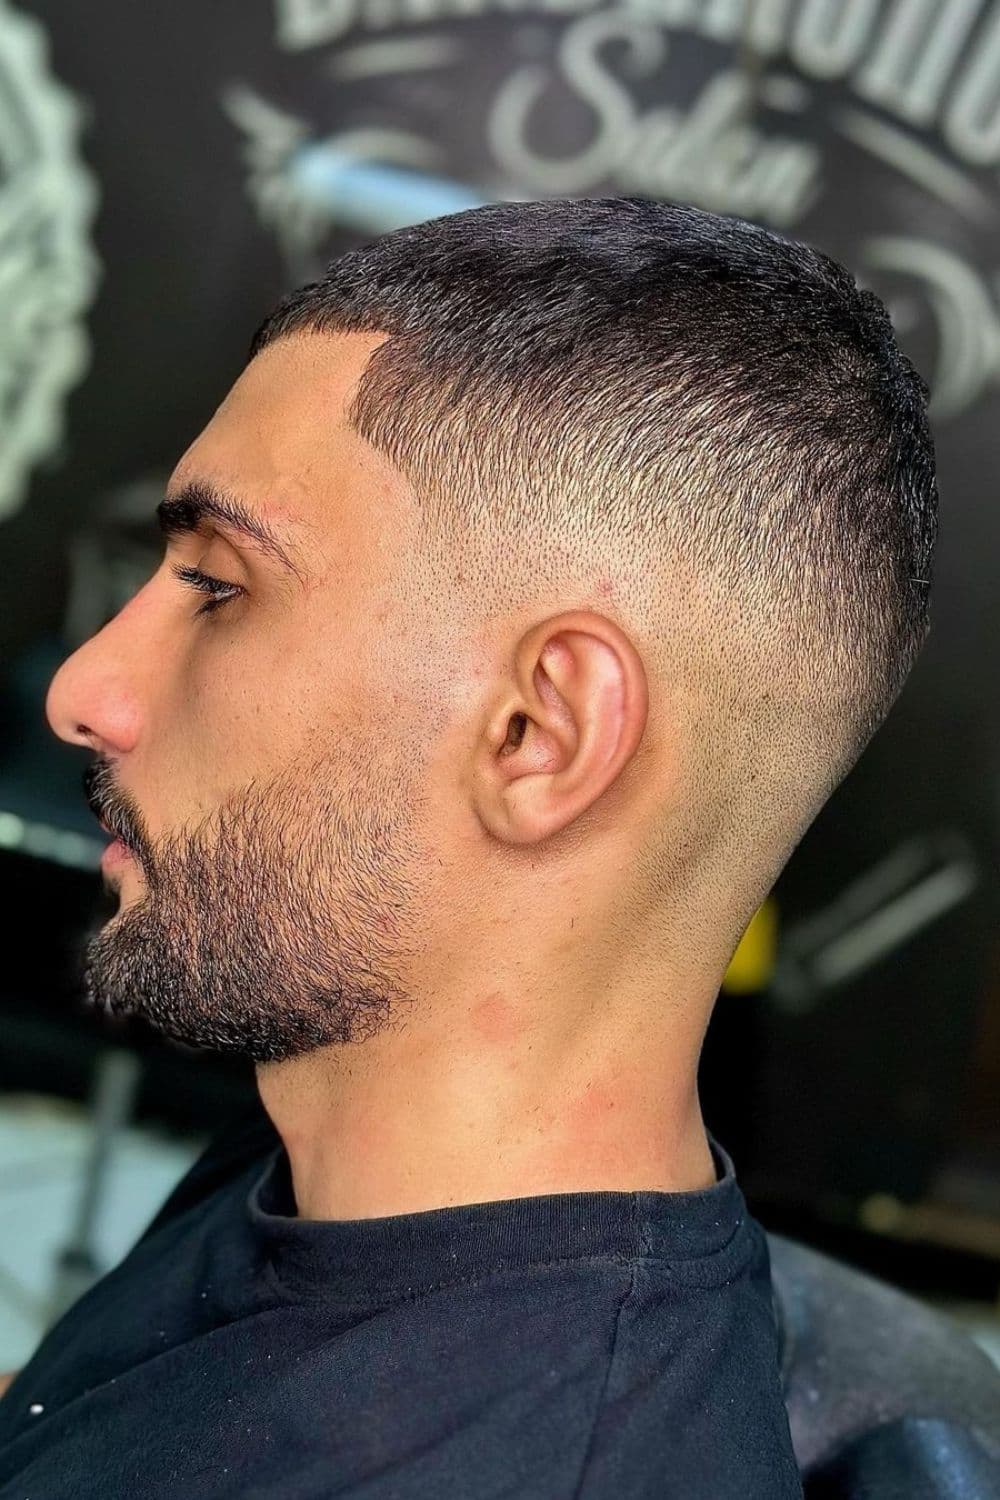 A man with a tapered buzz cut.